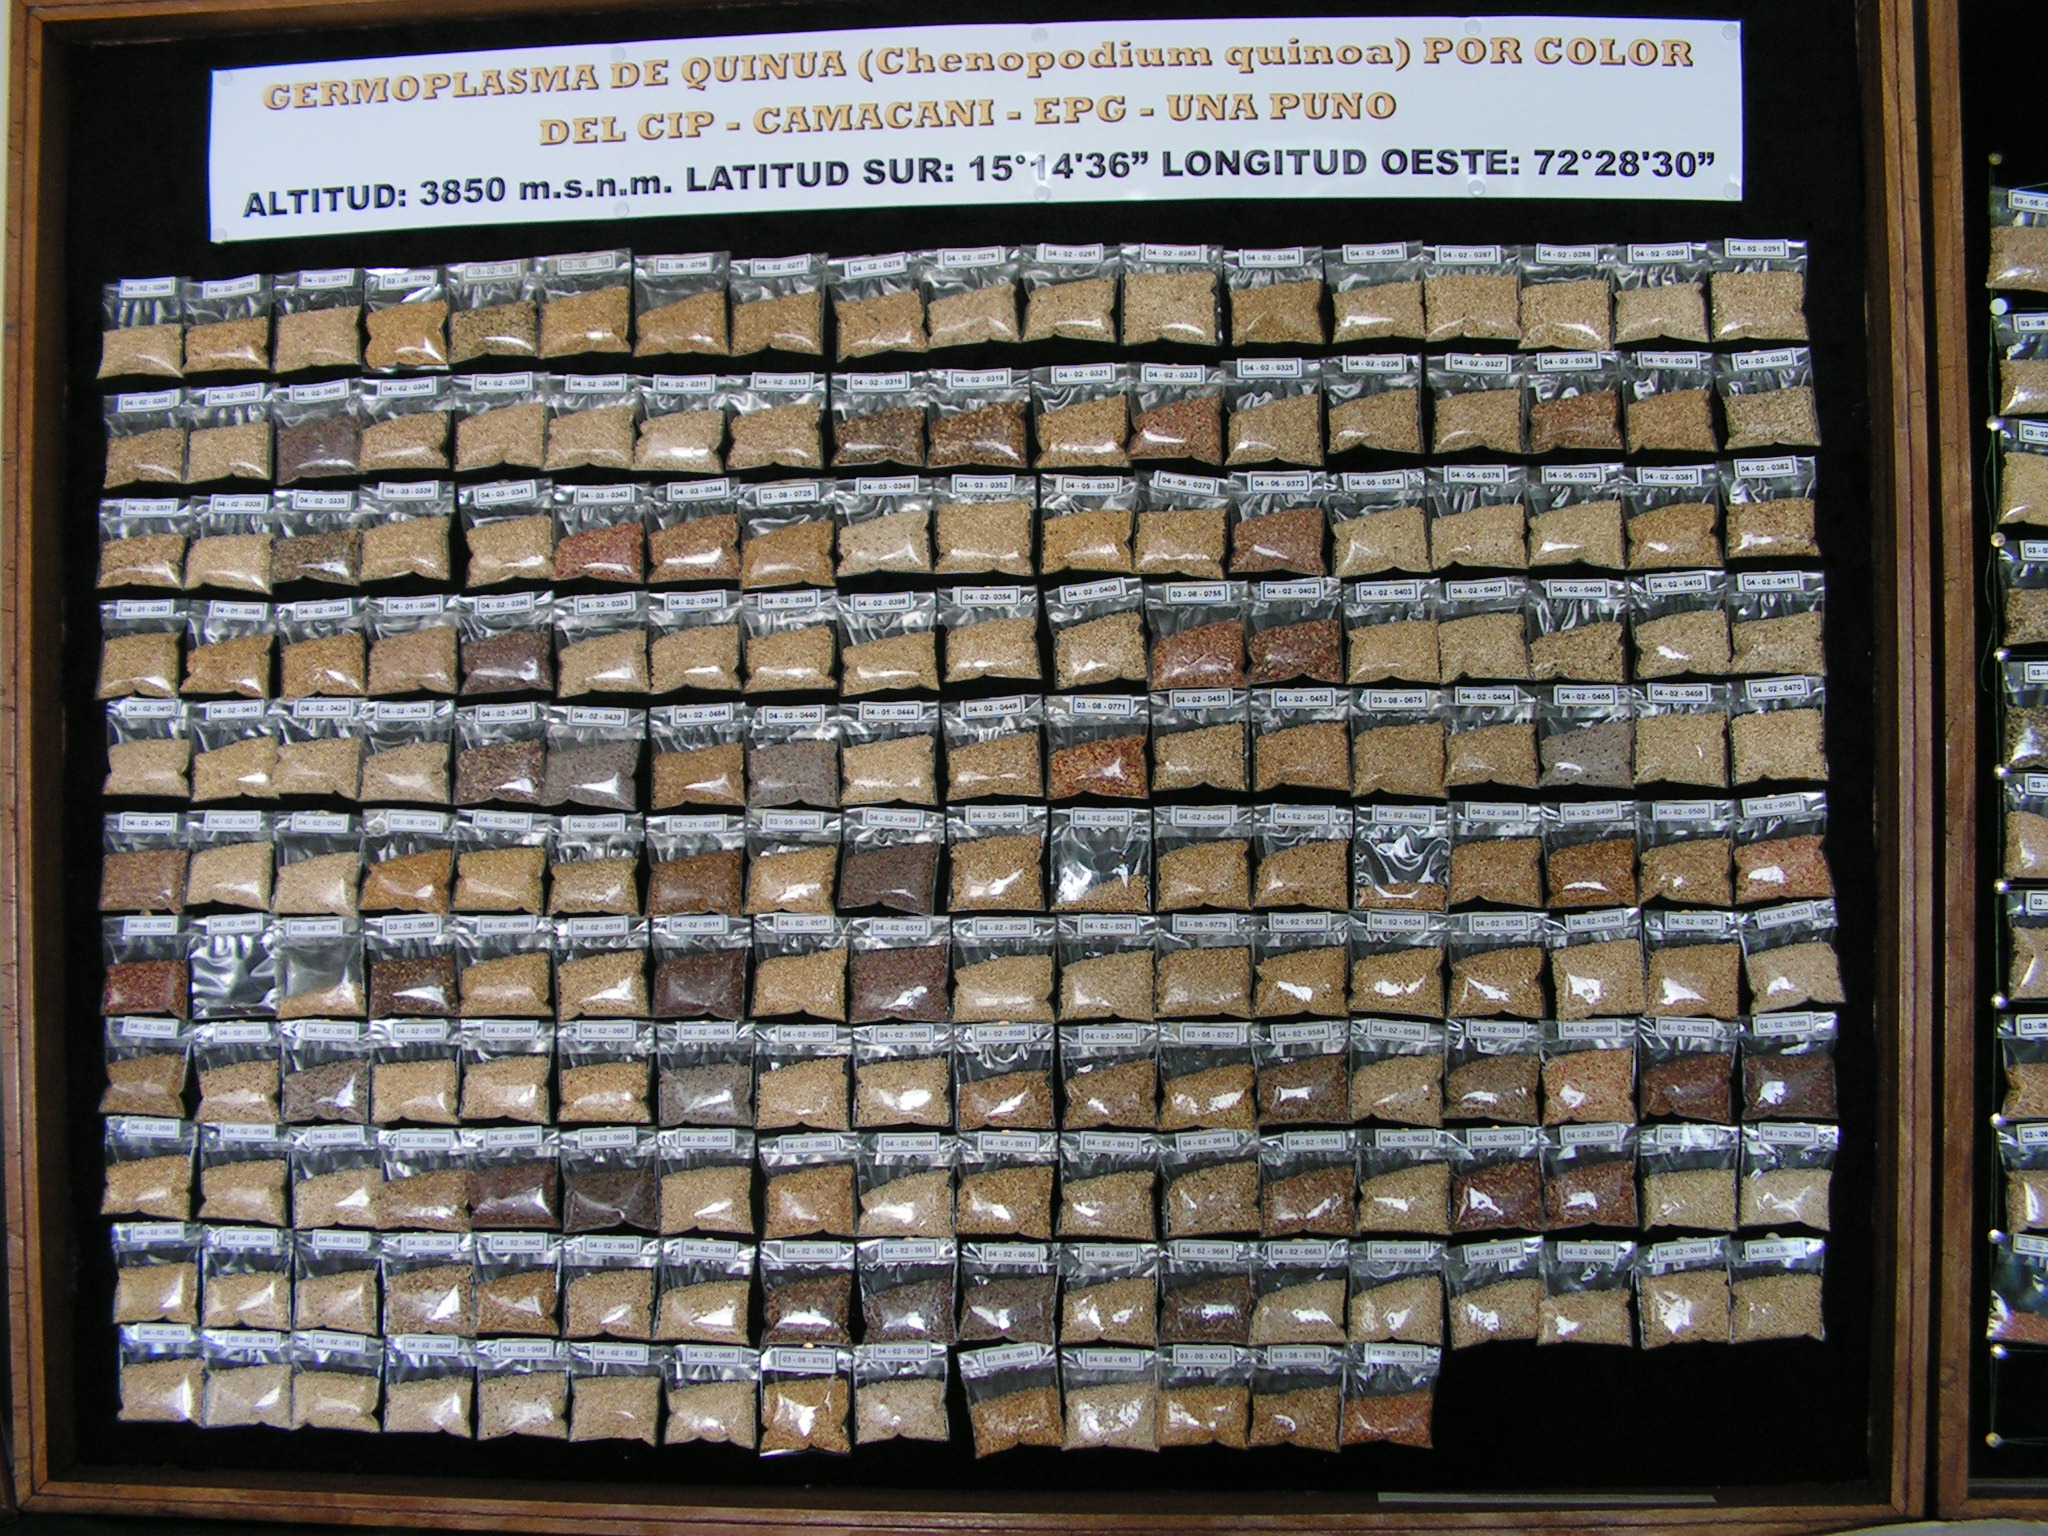 Quinoa seed collection of UNAP in Camamcani Peru